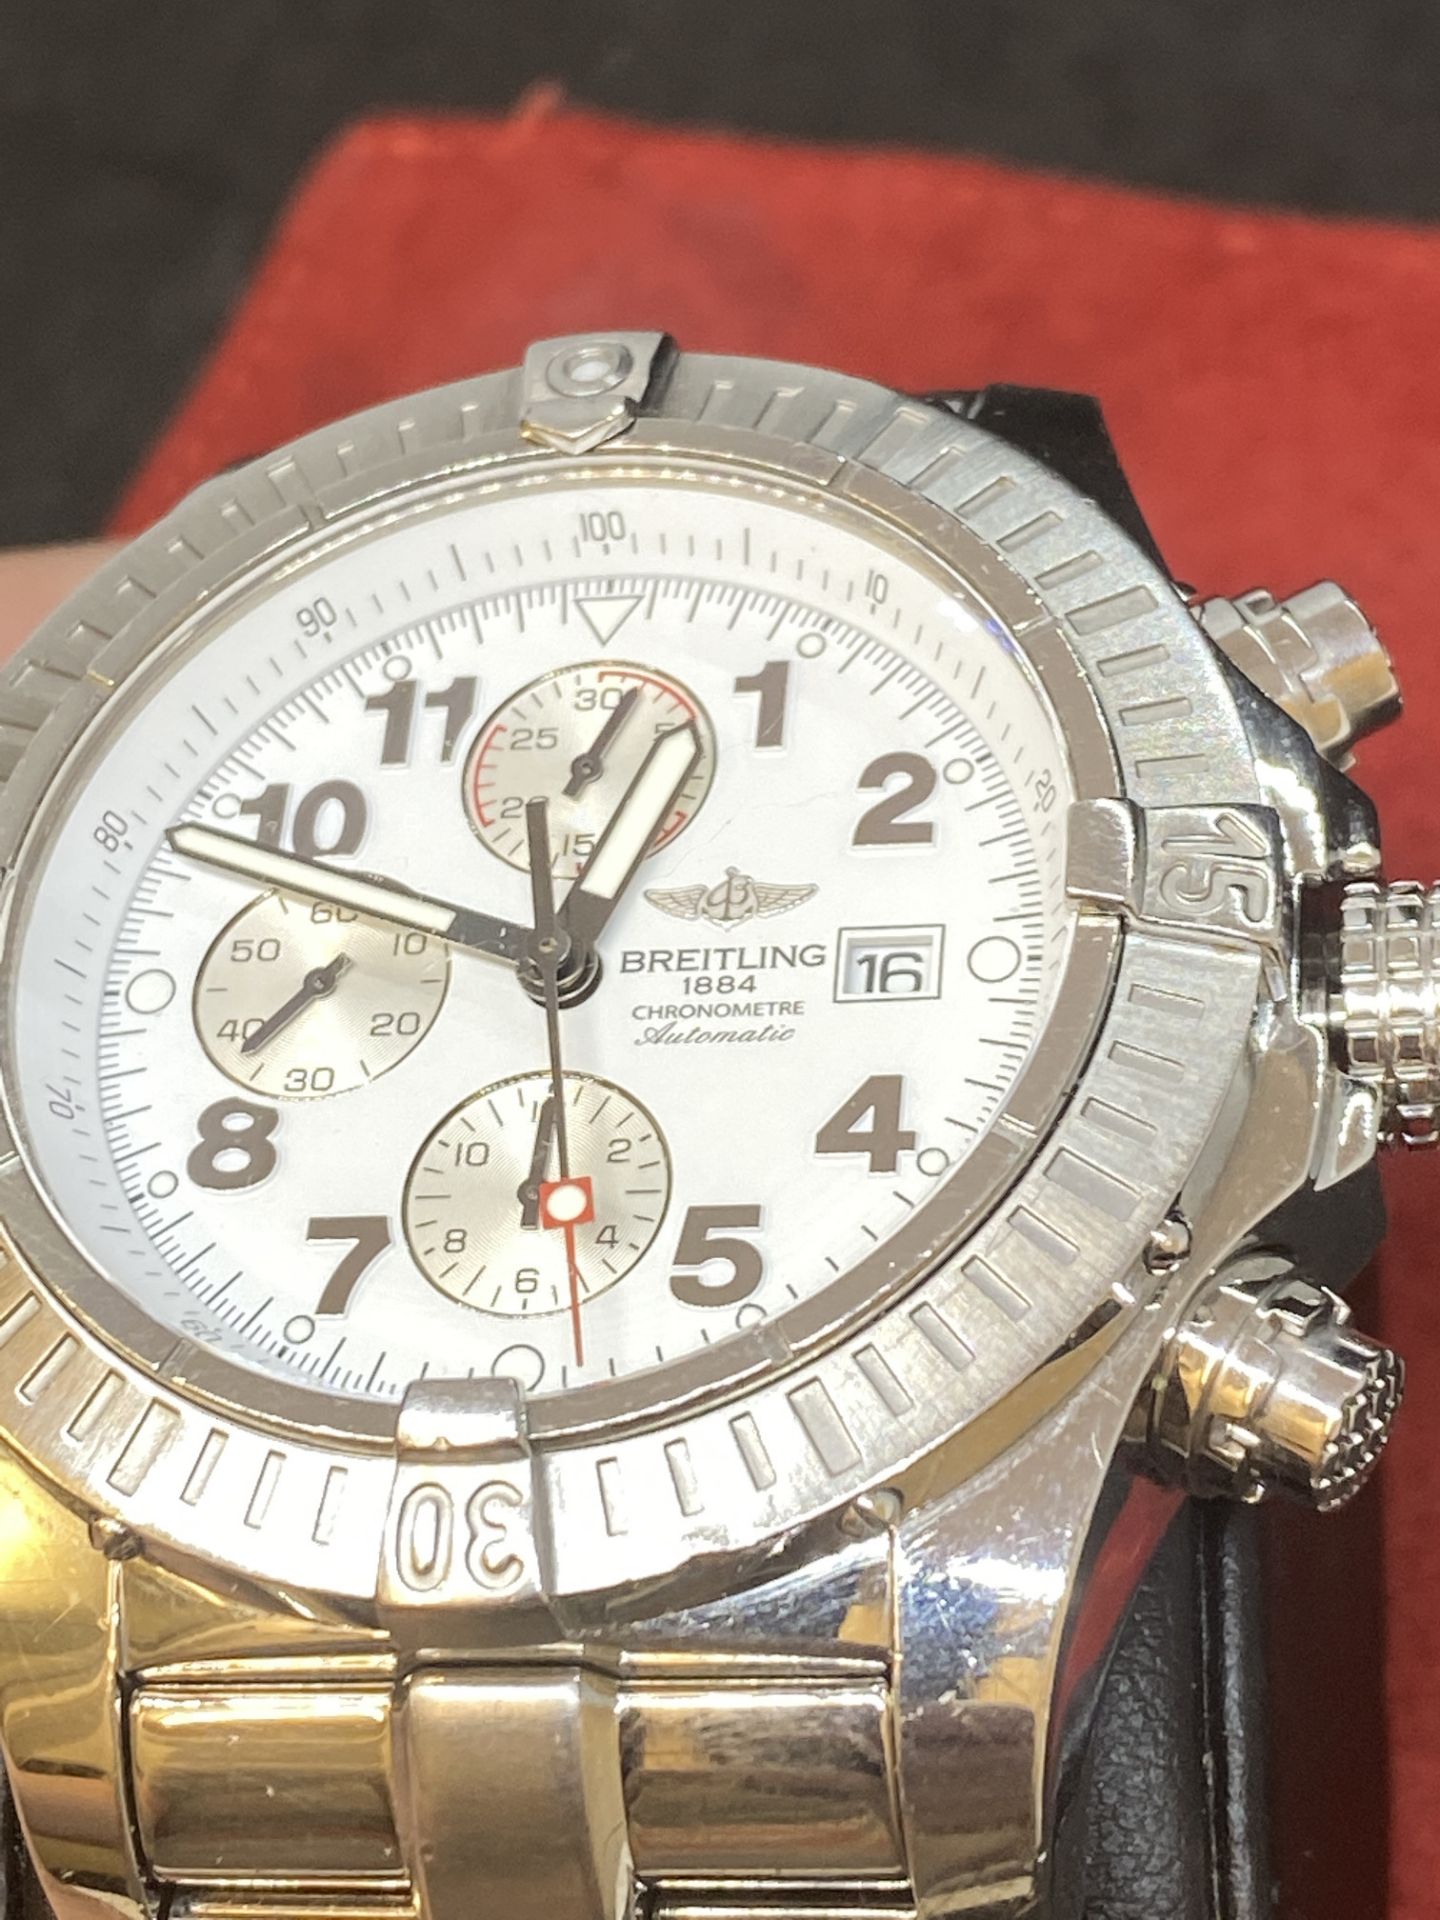 BREITLING CHRONO WATCH - Image 7 of 10